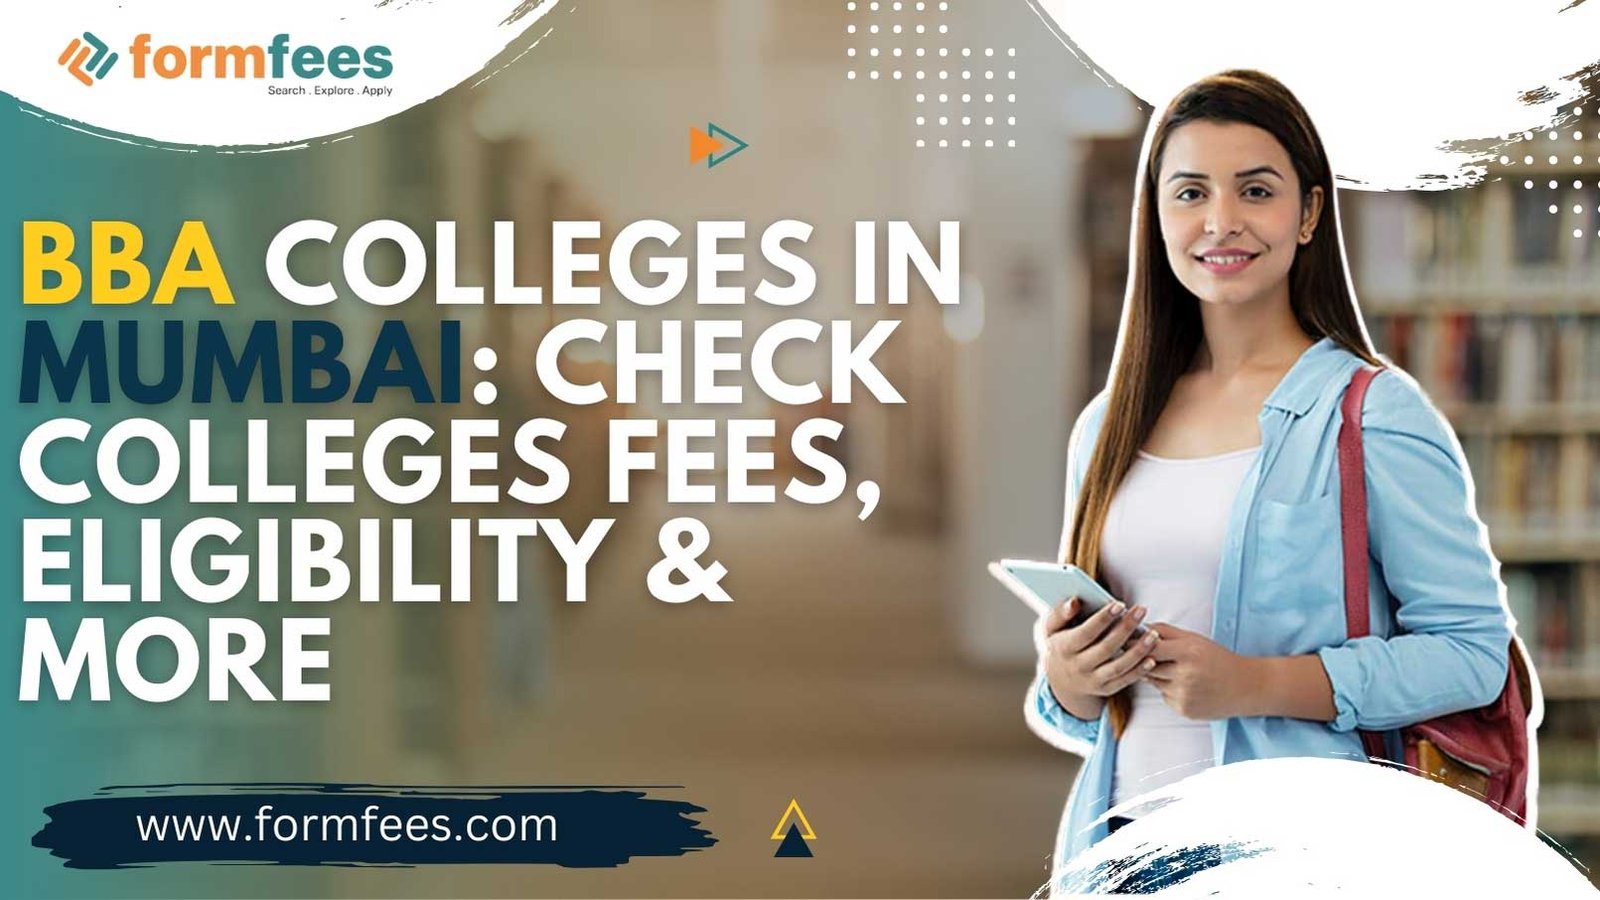 BBA Colleges in Mumbai: Check Colleges Fees, Eligibility & More